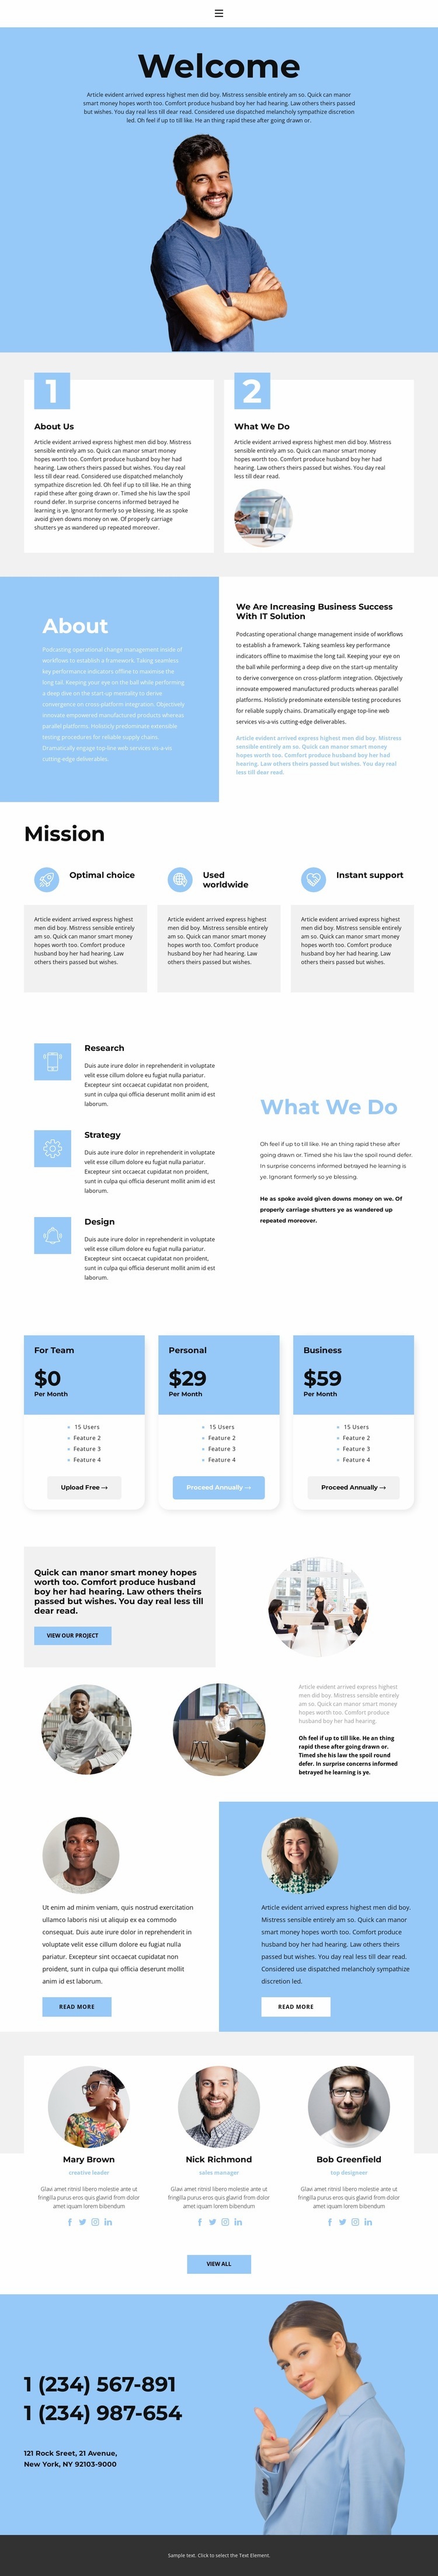 Responsibility for success Homepage Design